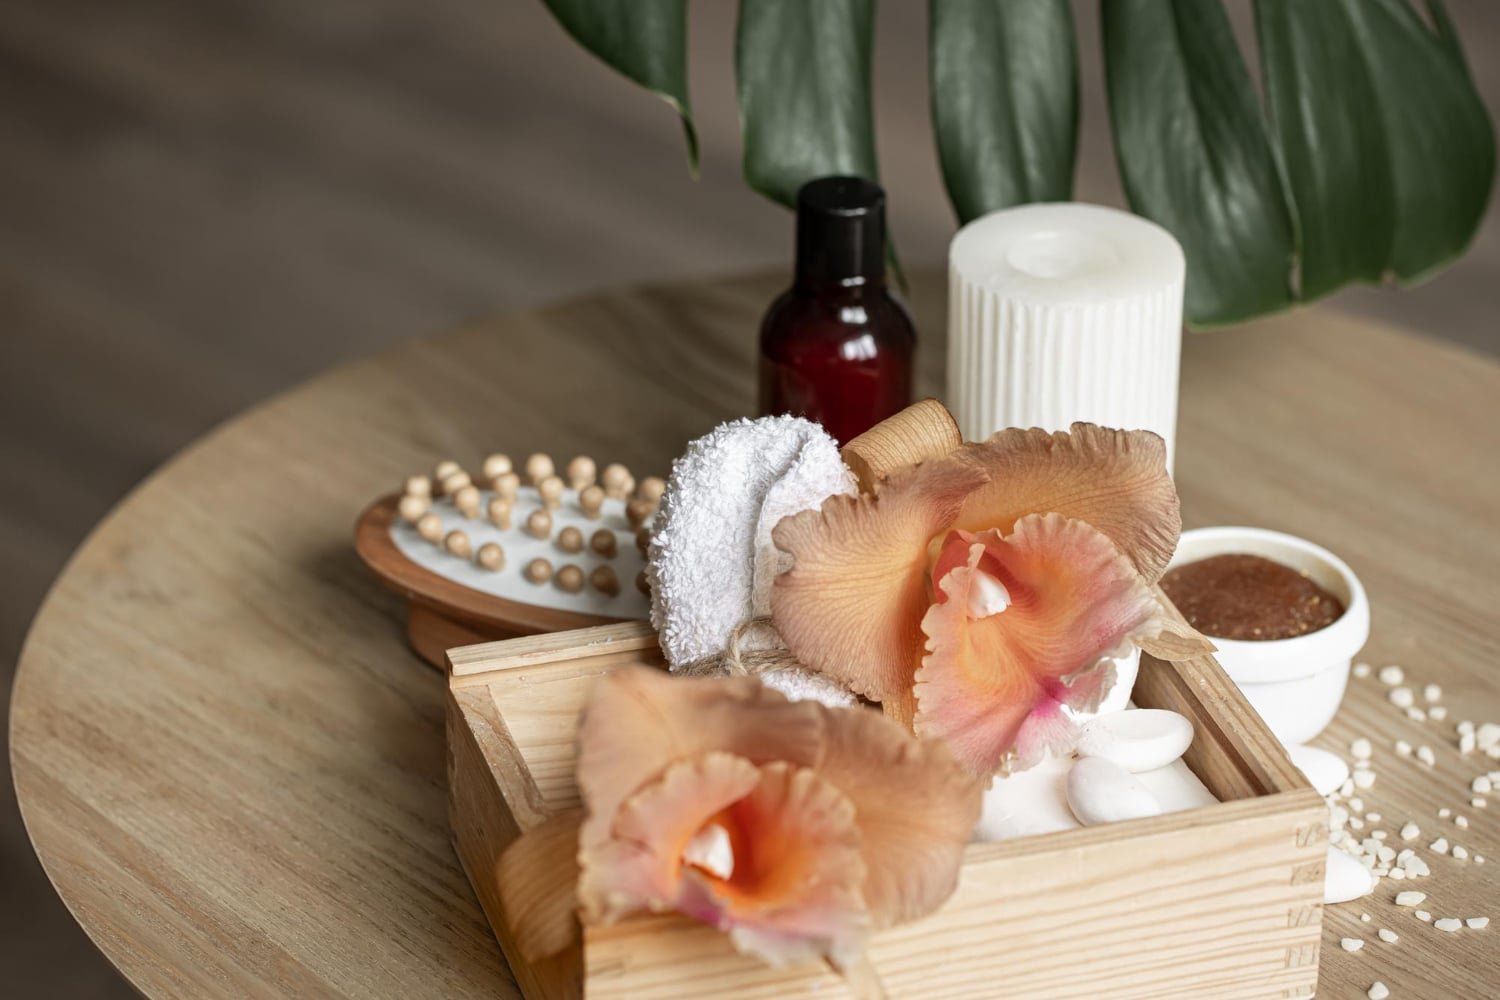 You are currently viewing Enjoy A Luxurious Bathing Experience With Bottger.nl’s Natural Bath And Body Products